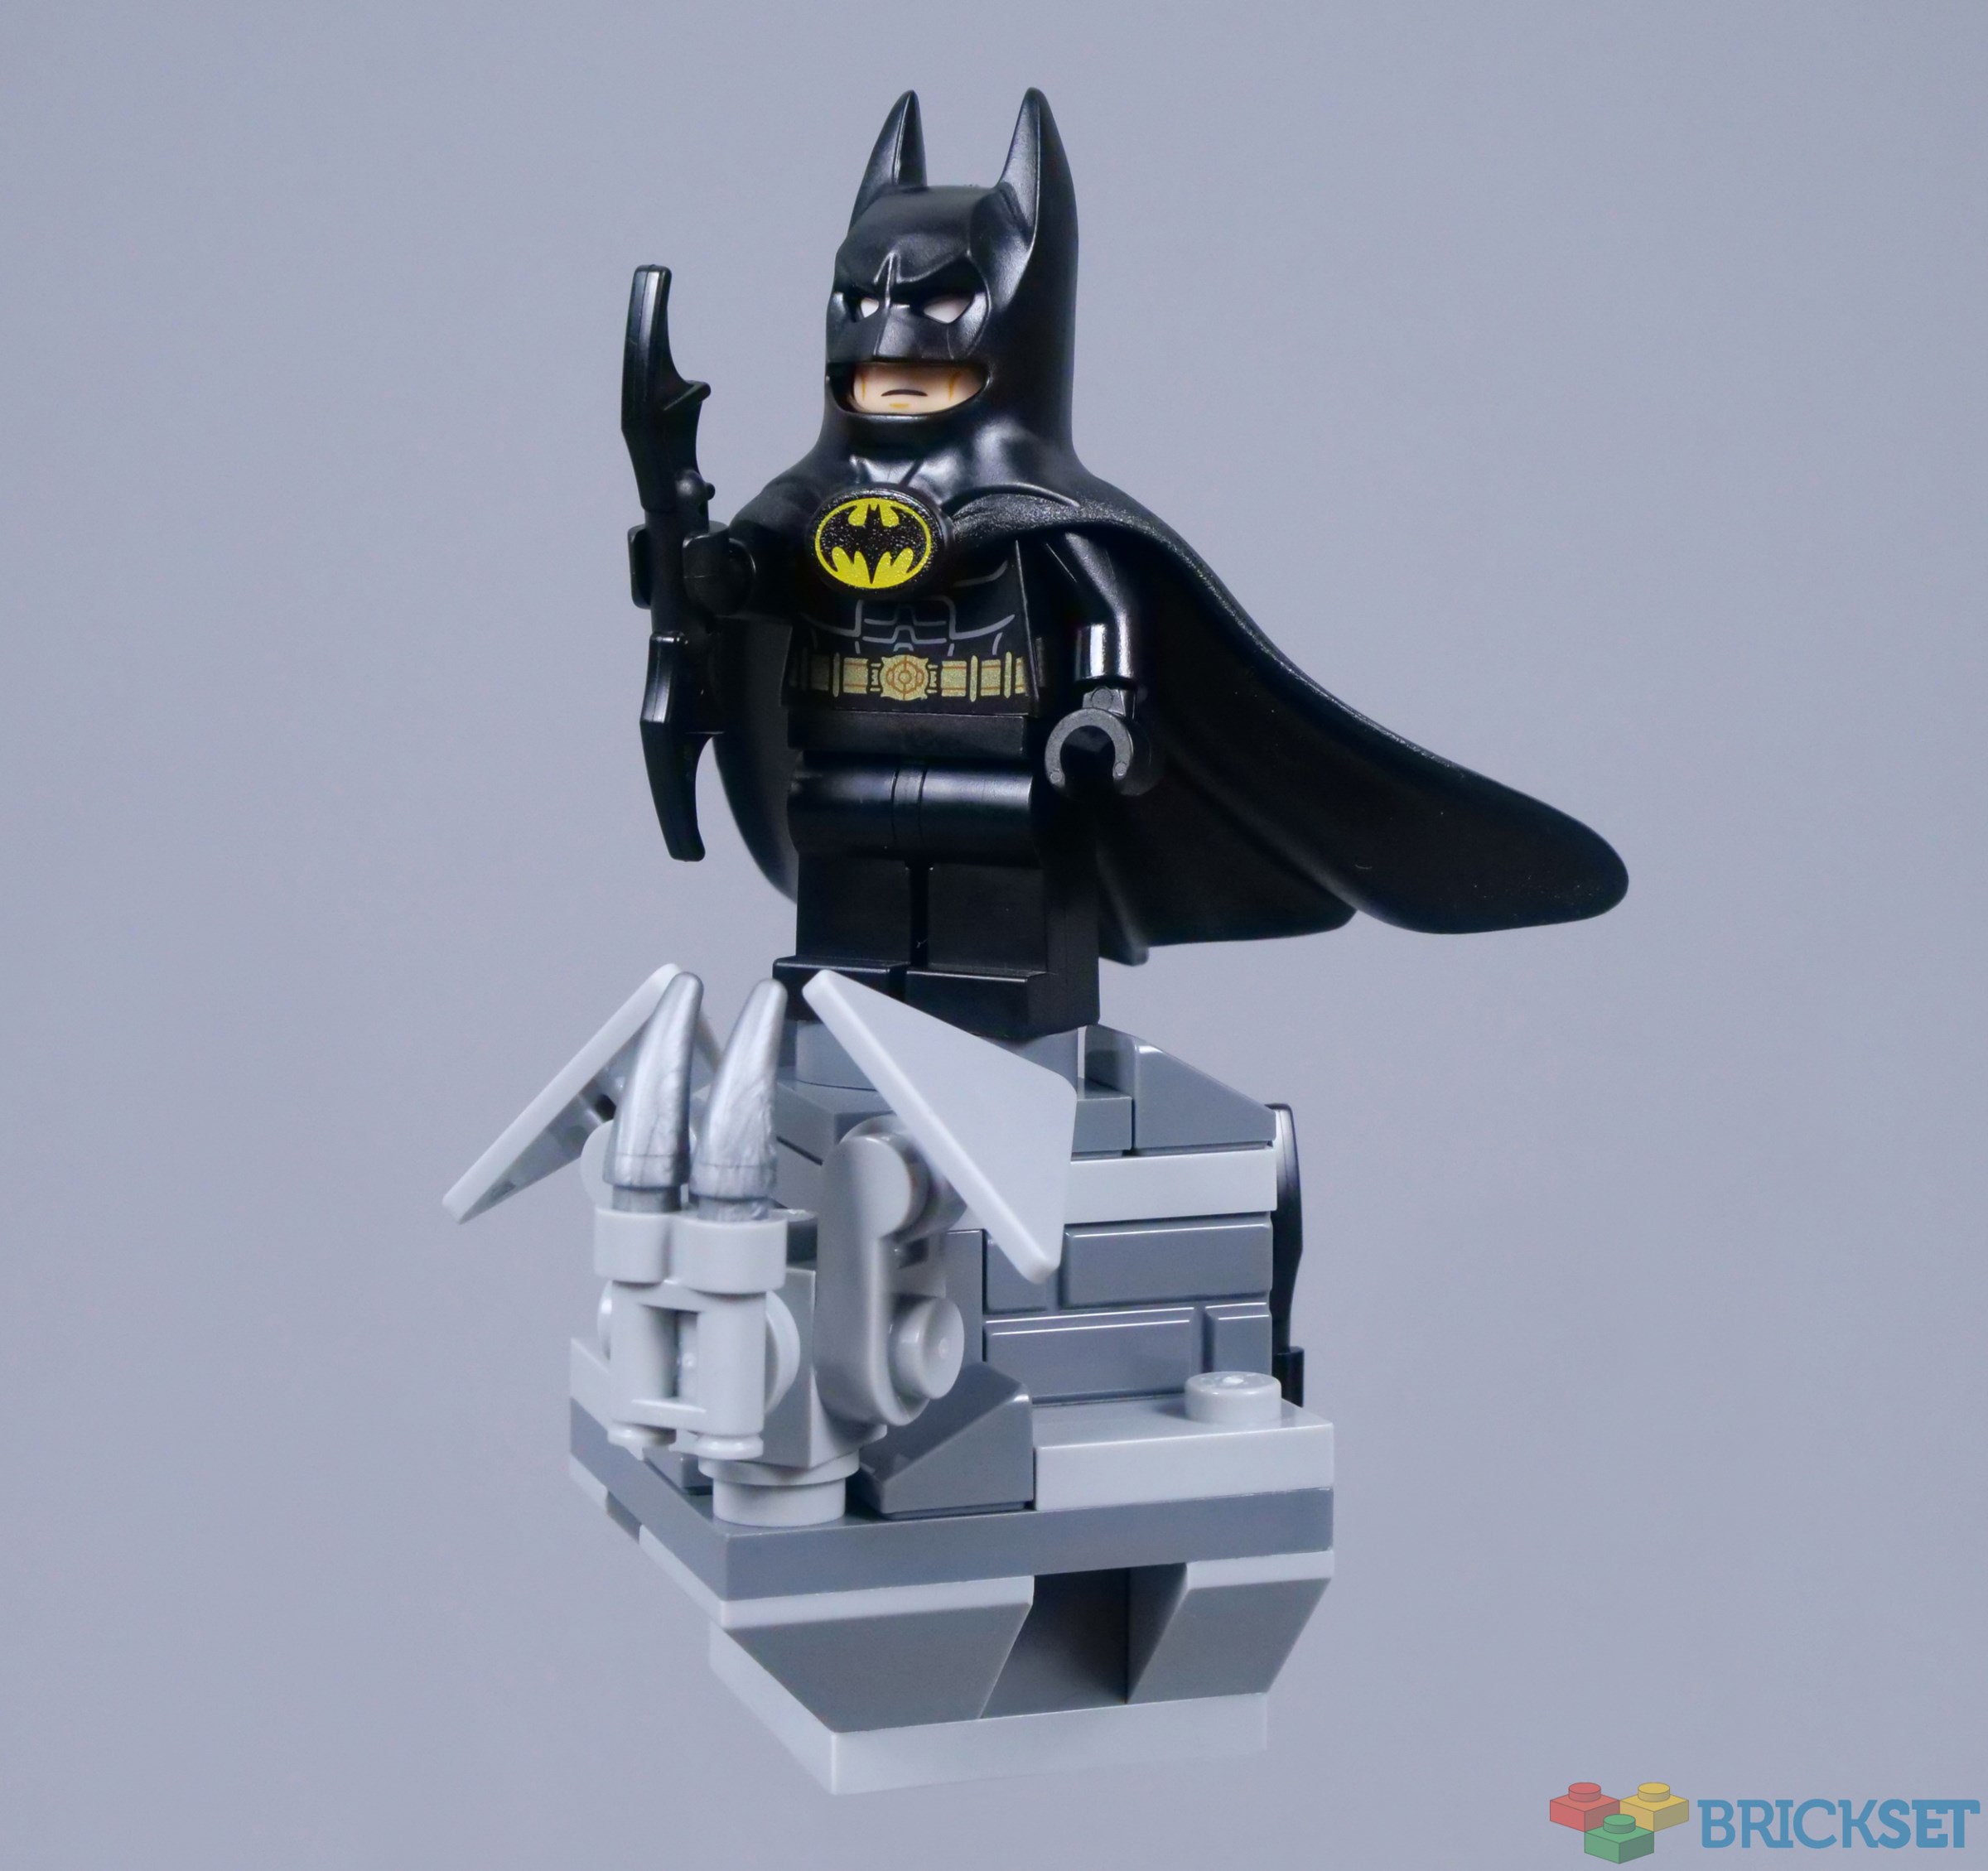 The LEGO Batman Movie review: Lego just fixed the DC Superhero